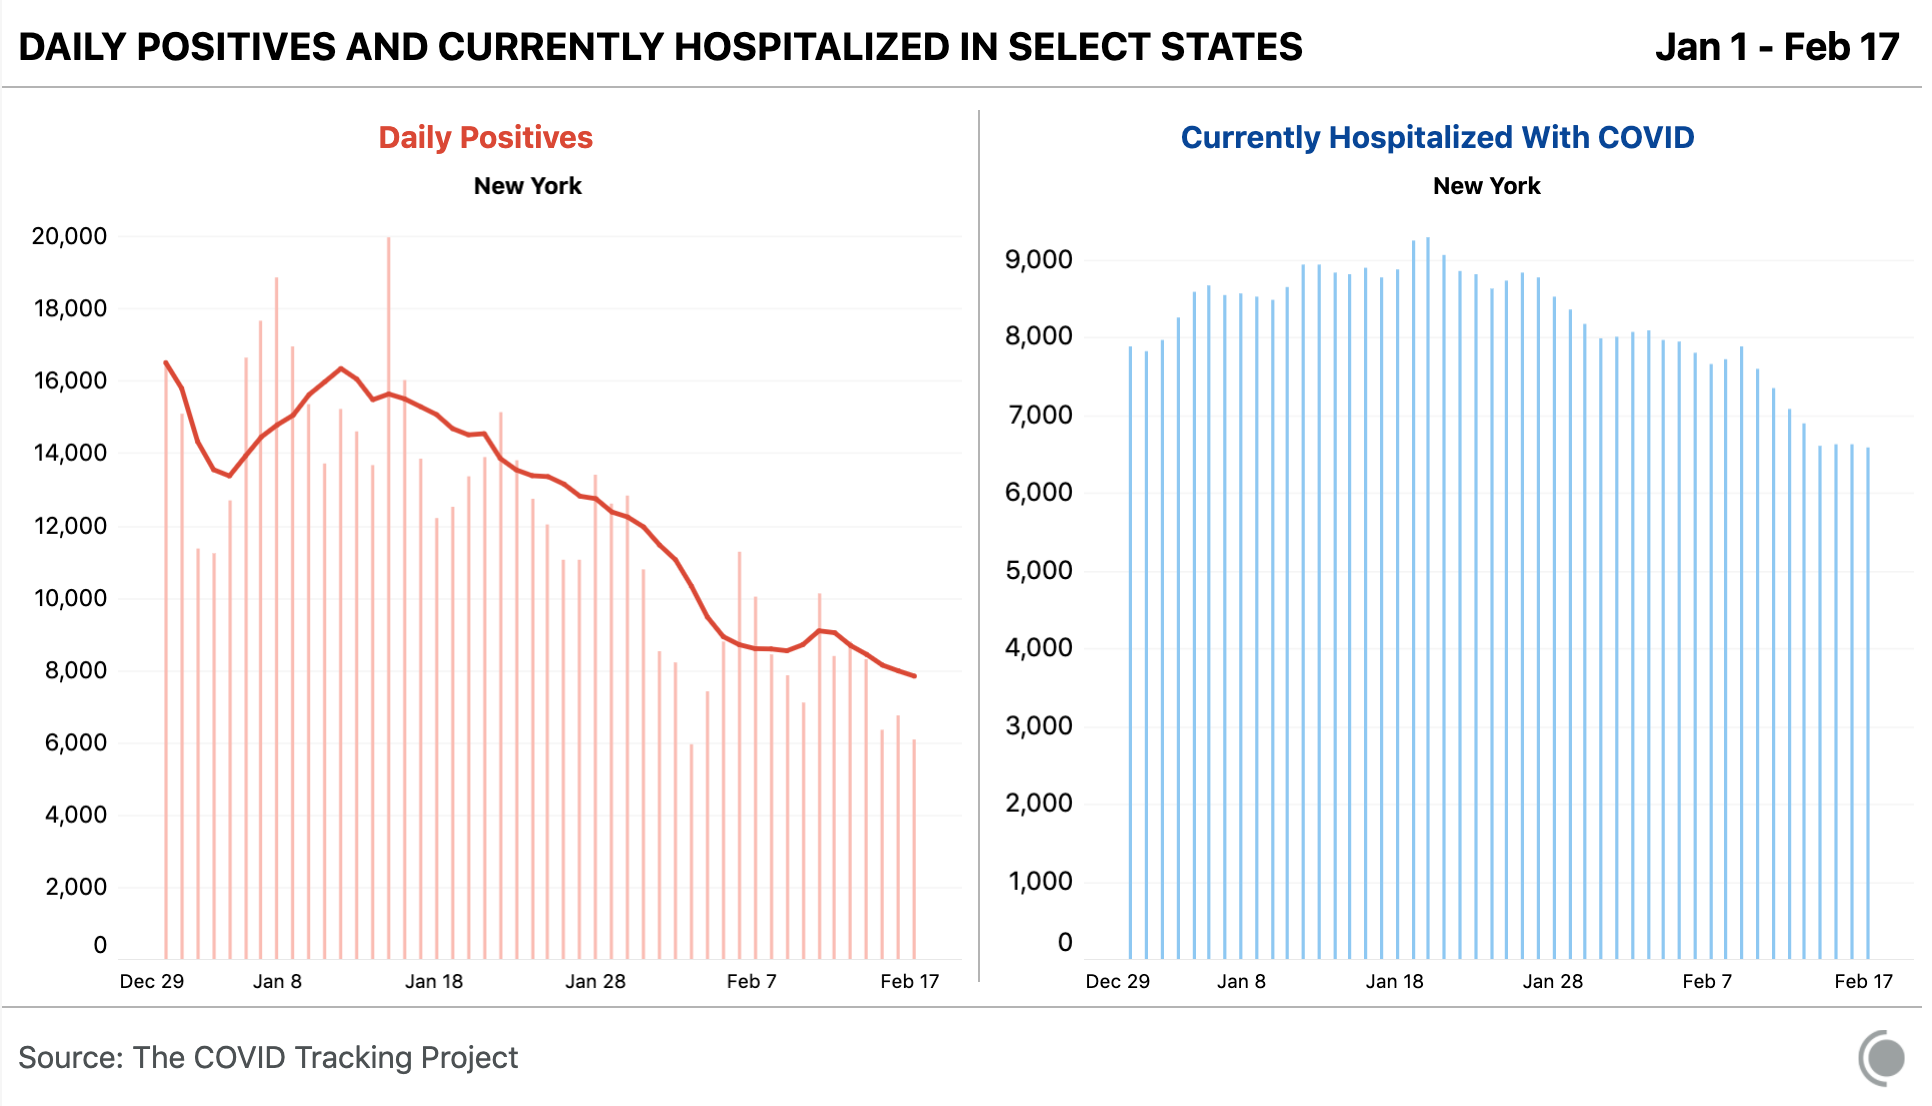 Two bar charts showing daily positives and currently hospitalized in New York. A wobble in reported positives is visible around a week after the Feb 4 storm that disrupted reporting. No such wobble is visible in the currently hospitalized numbers.